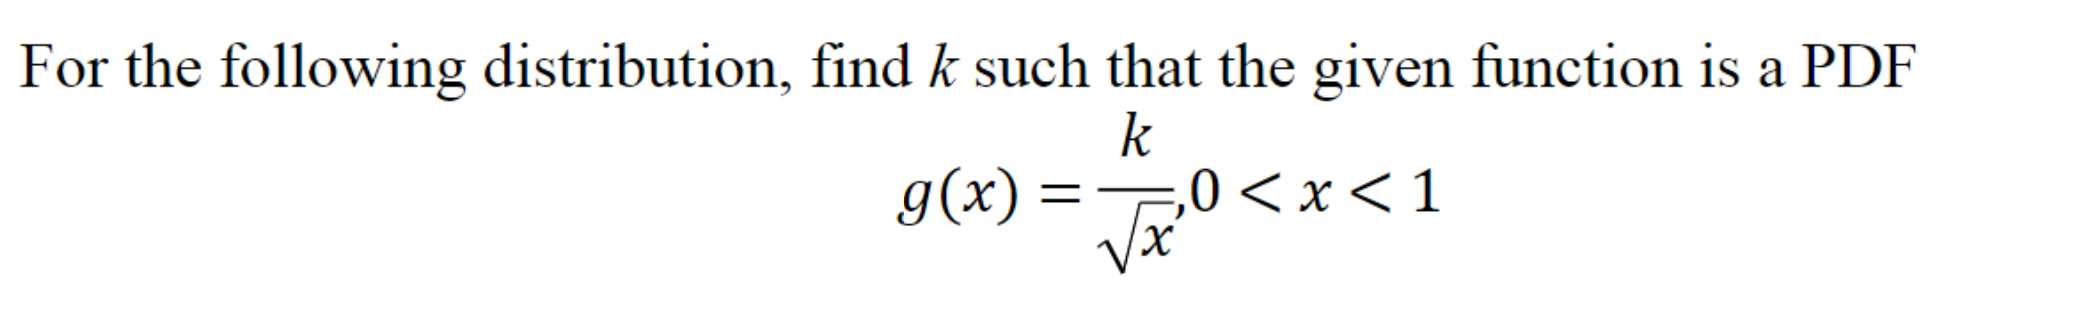 For the following distribution, find k such that the given function is a PDF
k
,0 < x < 1
g(x) =
